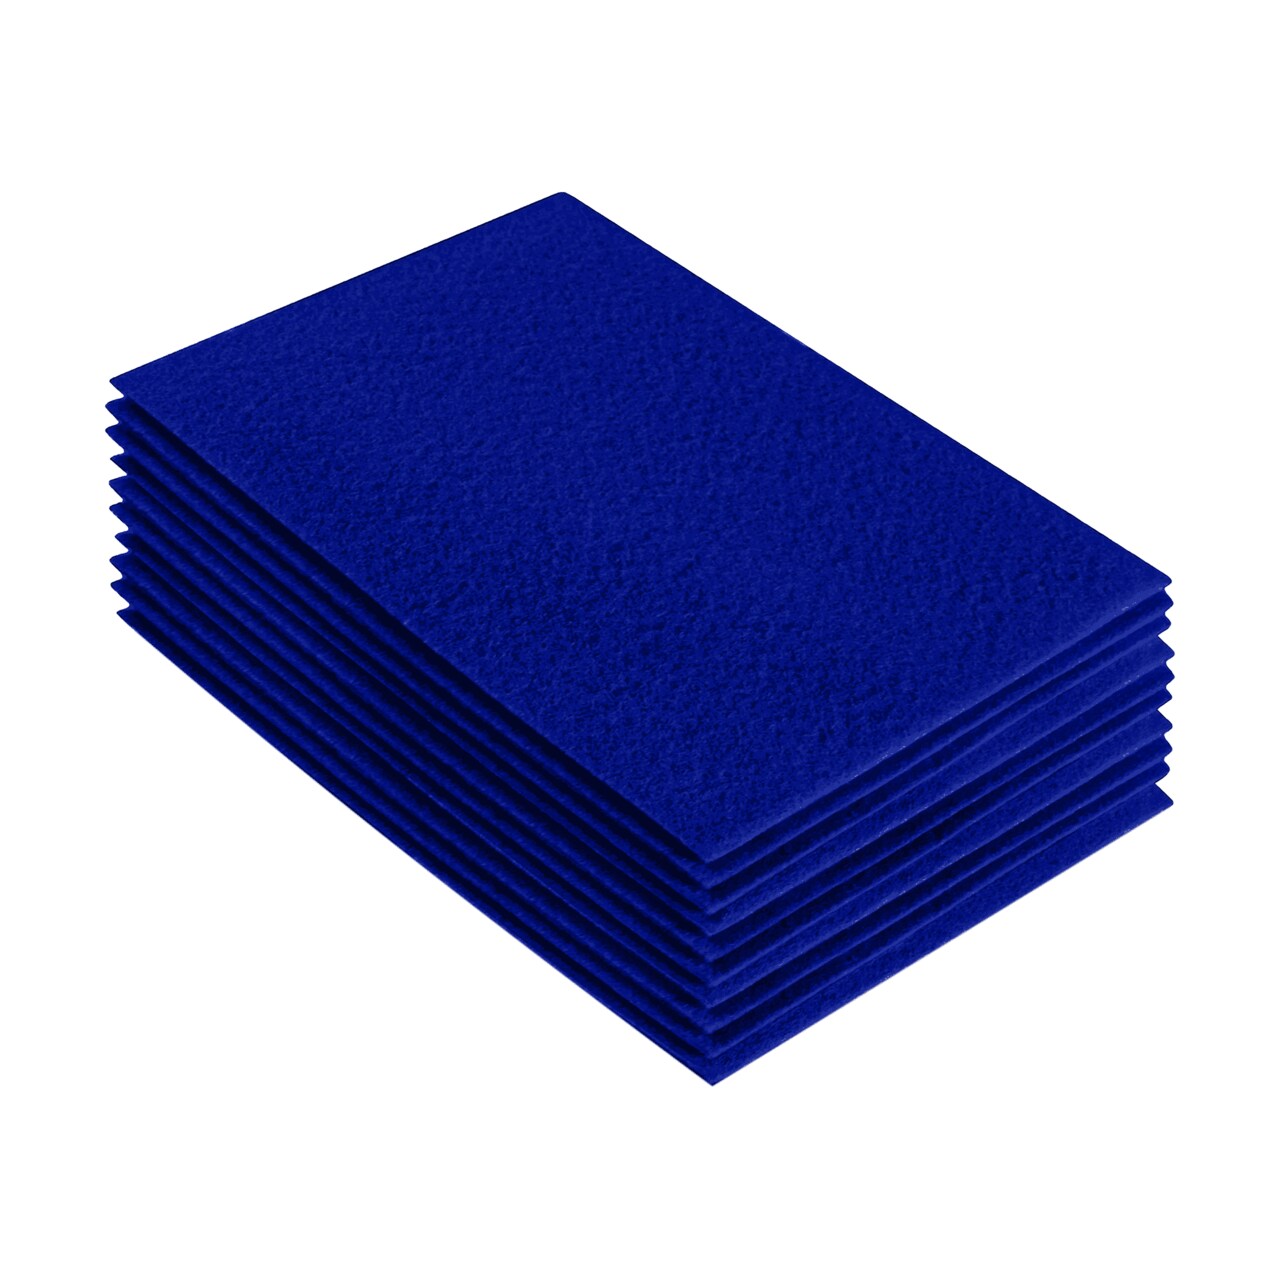 FabricLA Acrylic Felt Sheets for Crafts - Precut 9 X 12 Inches (20 cm X  30 cm) Felt Squares - Use Felt Fabric Craft Sheets for DIY, Hobby, Costume,  and Decoration, Royal Blue